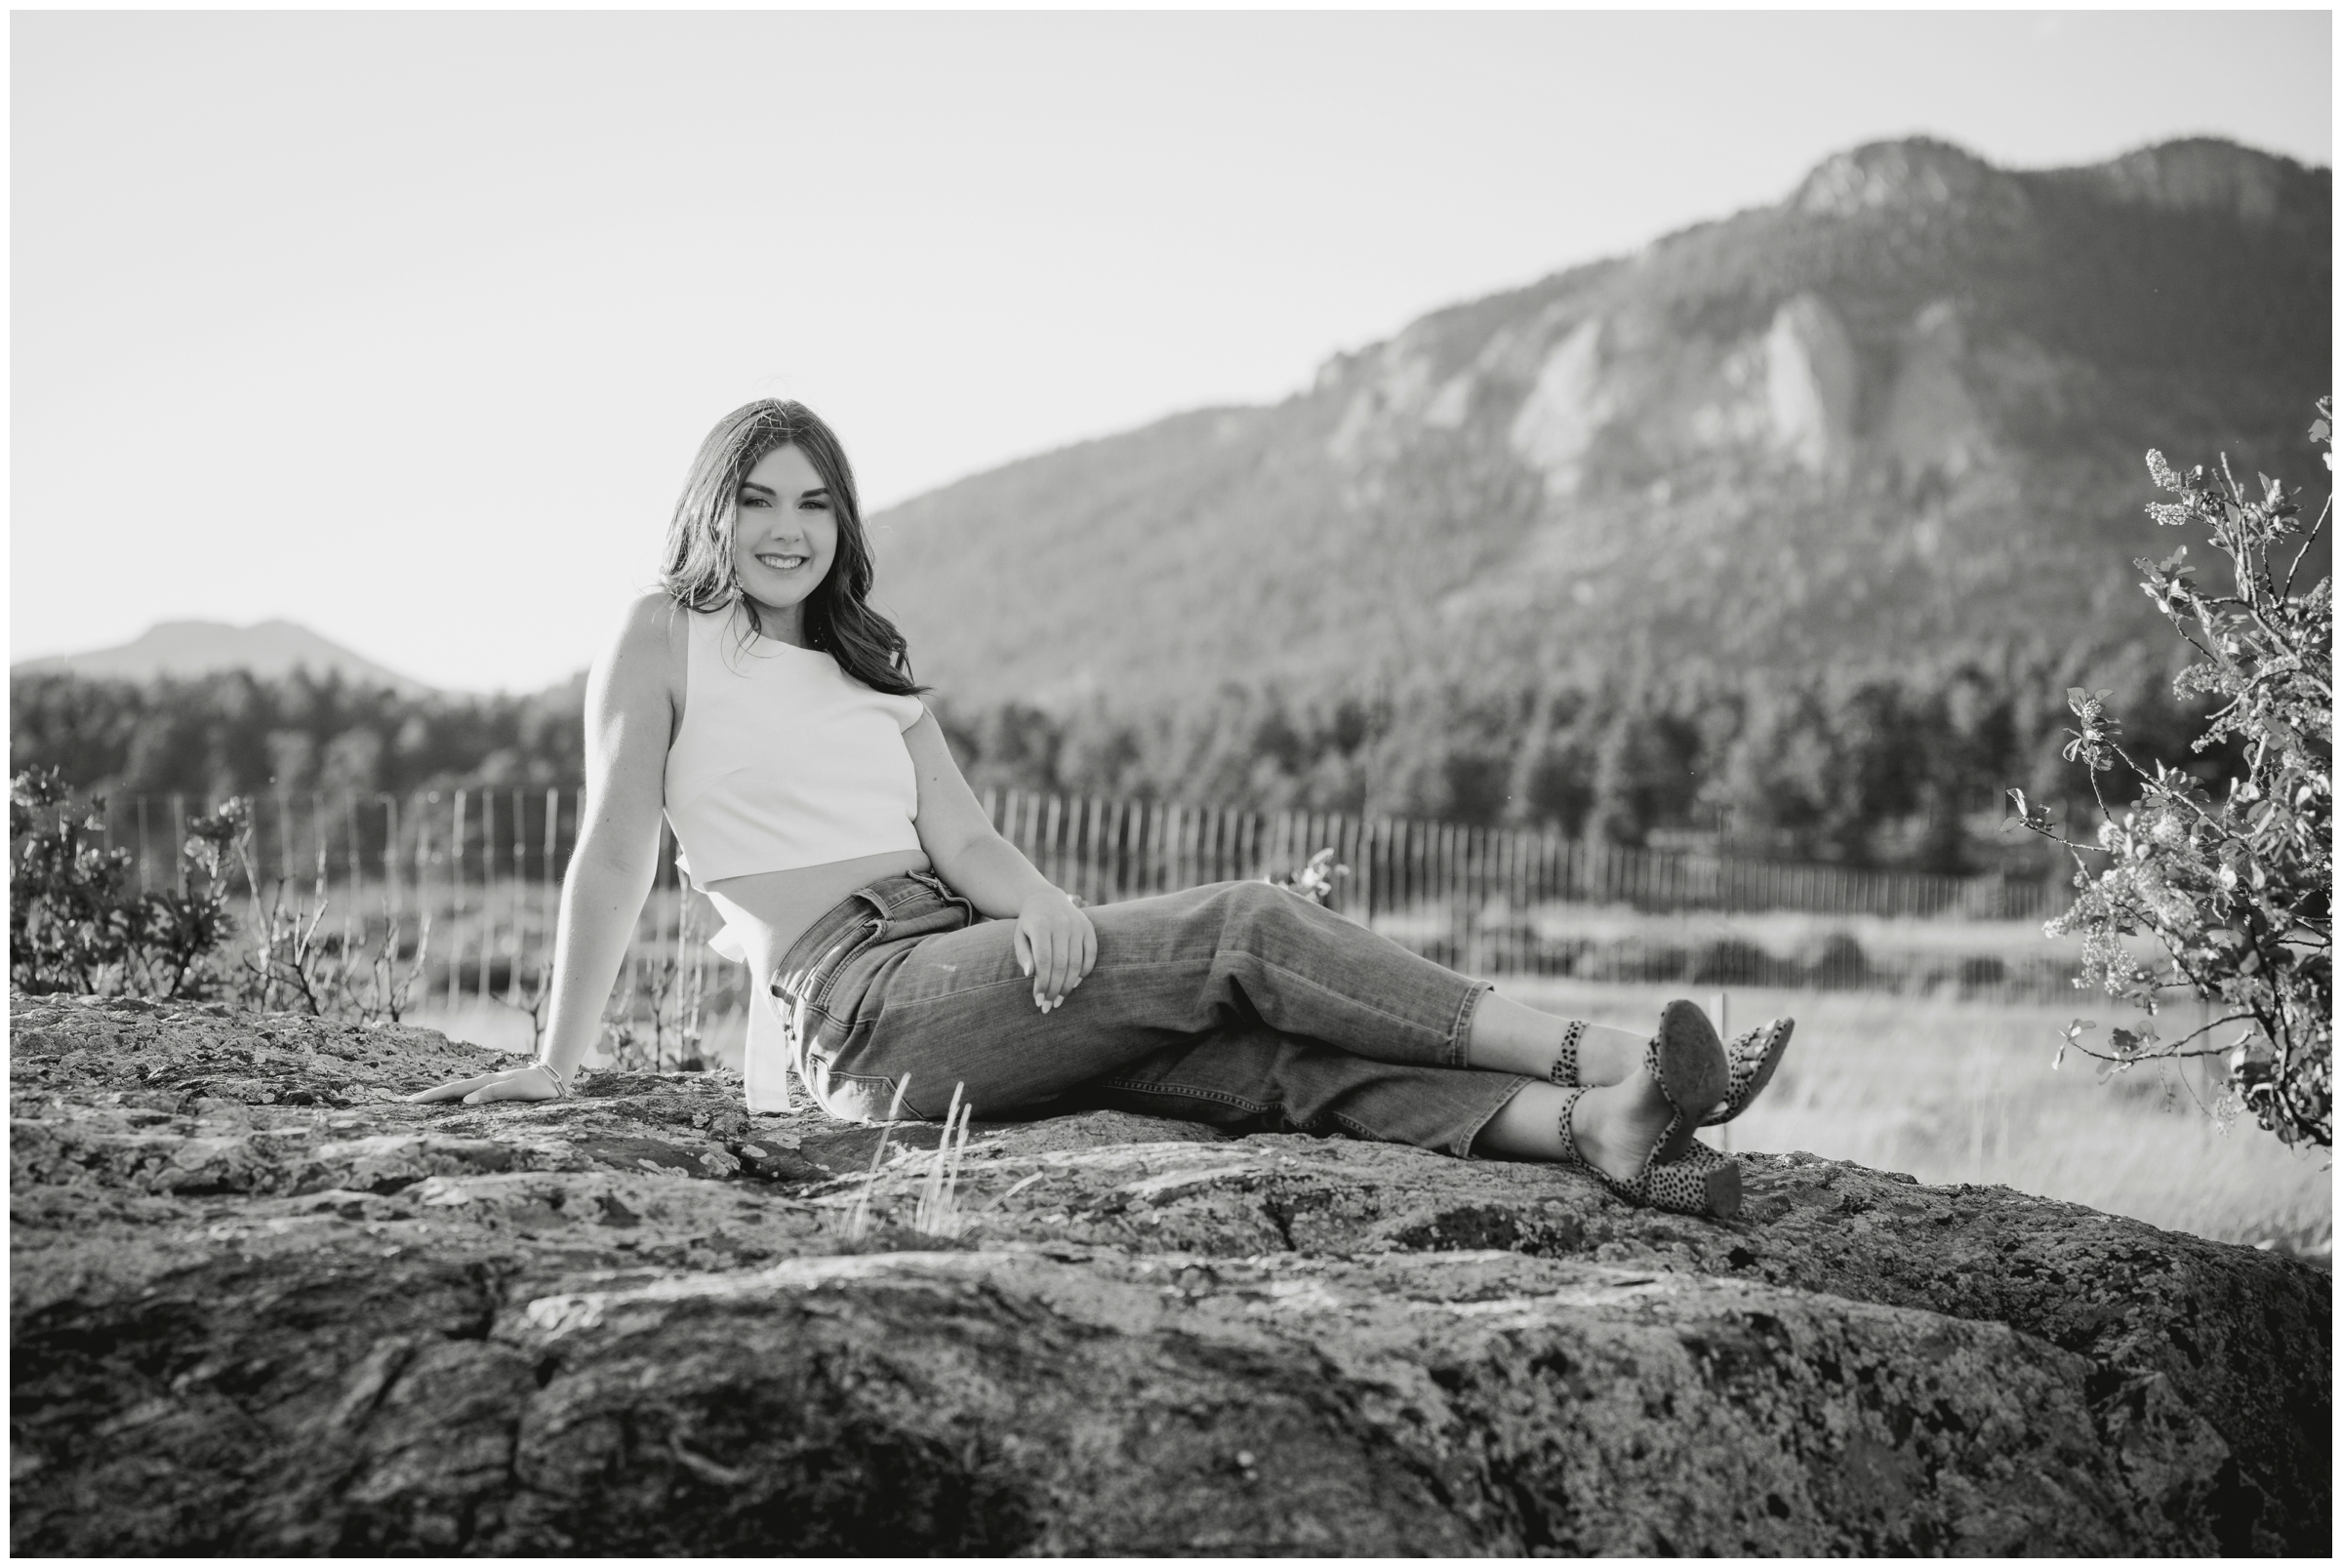 high school graduation photography session in the Colorado mountains